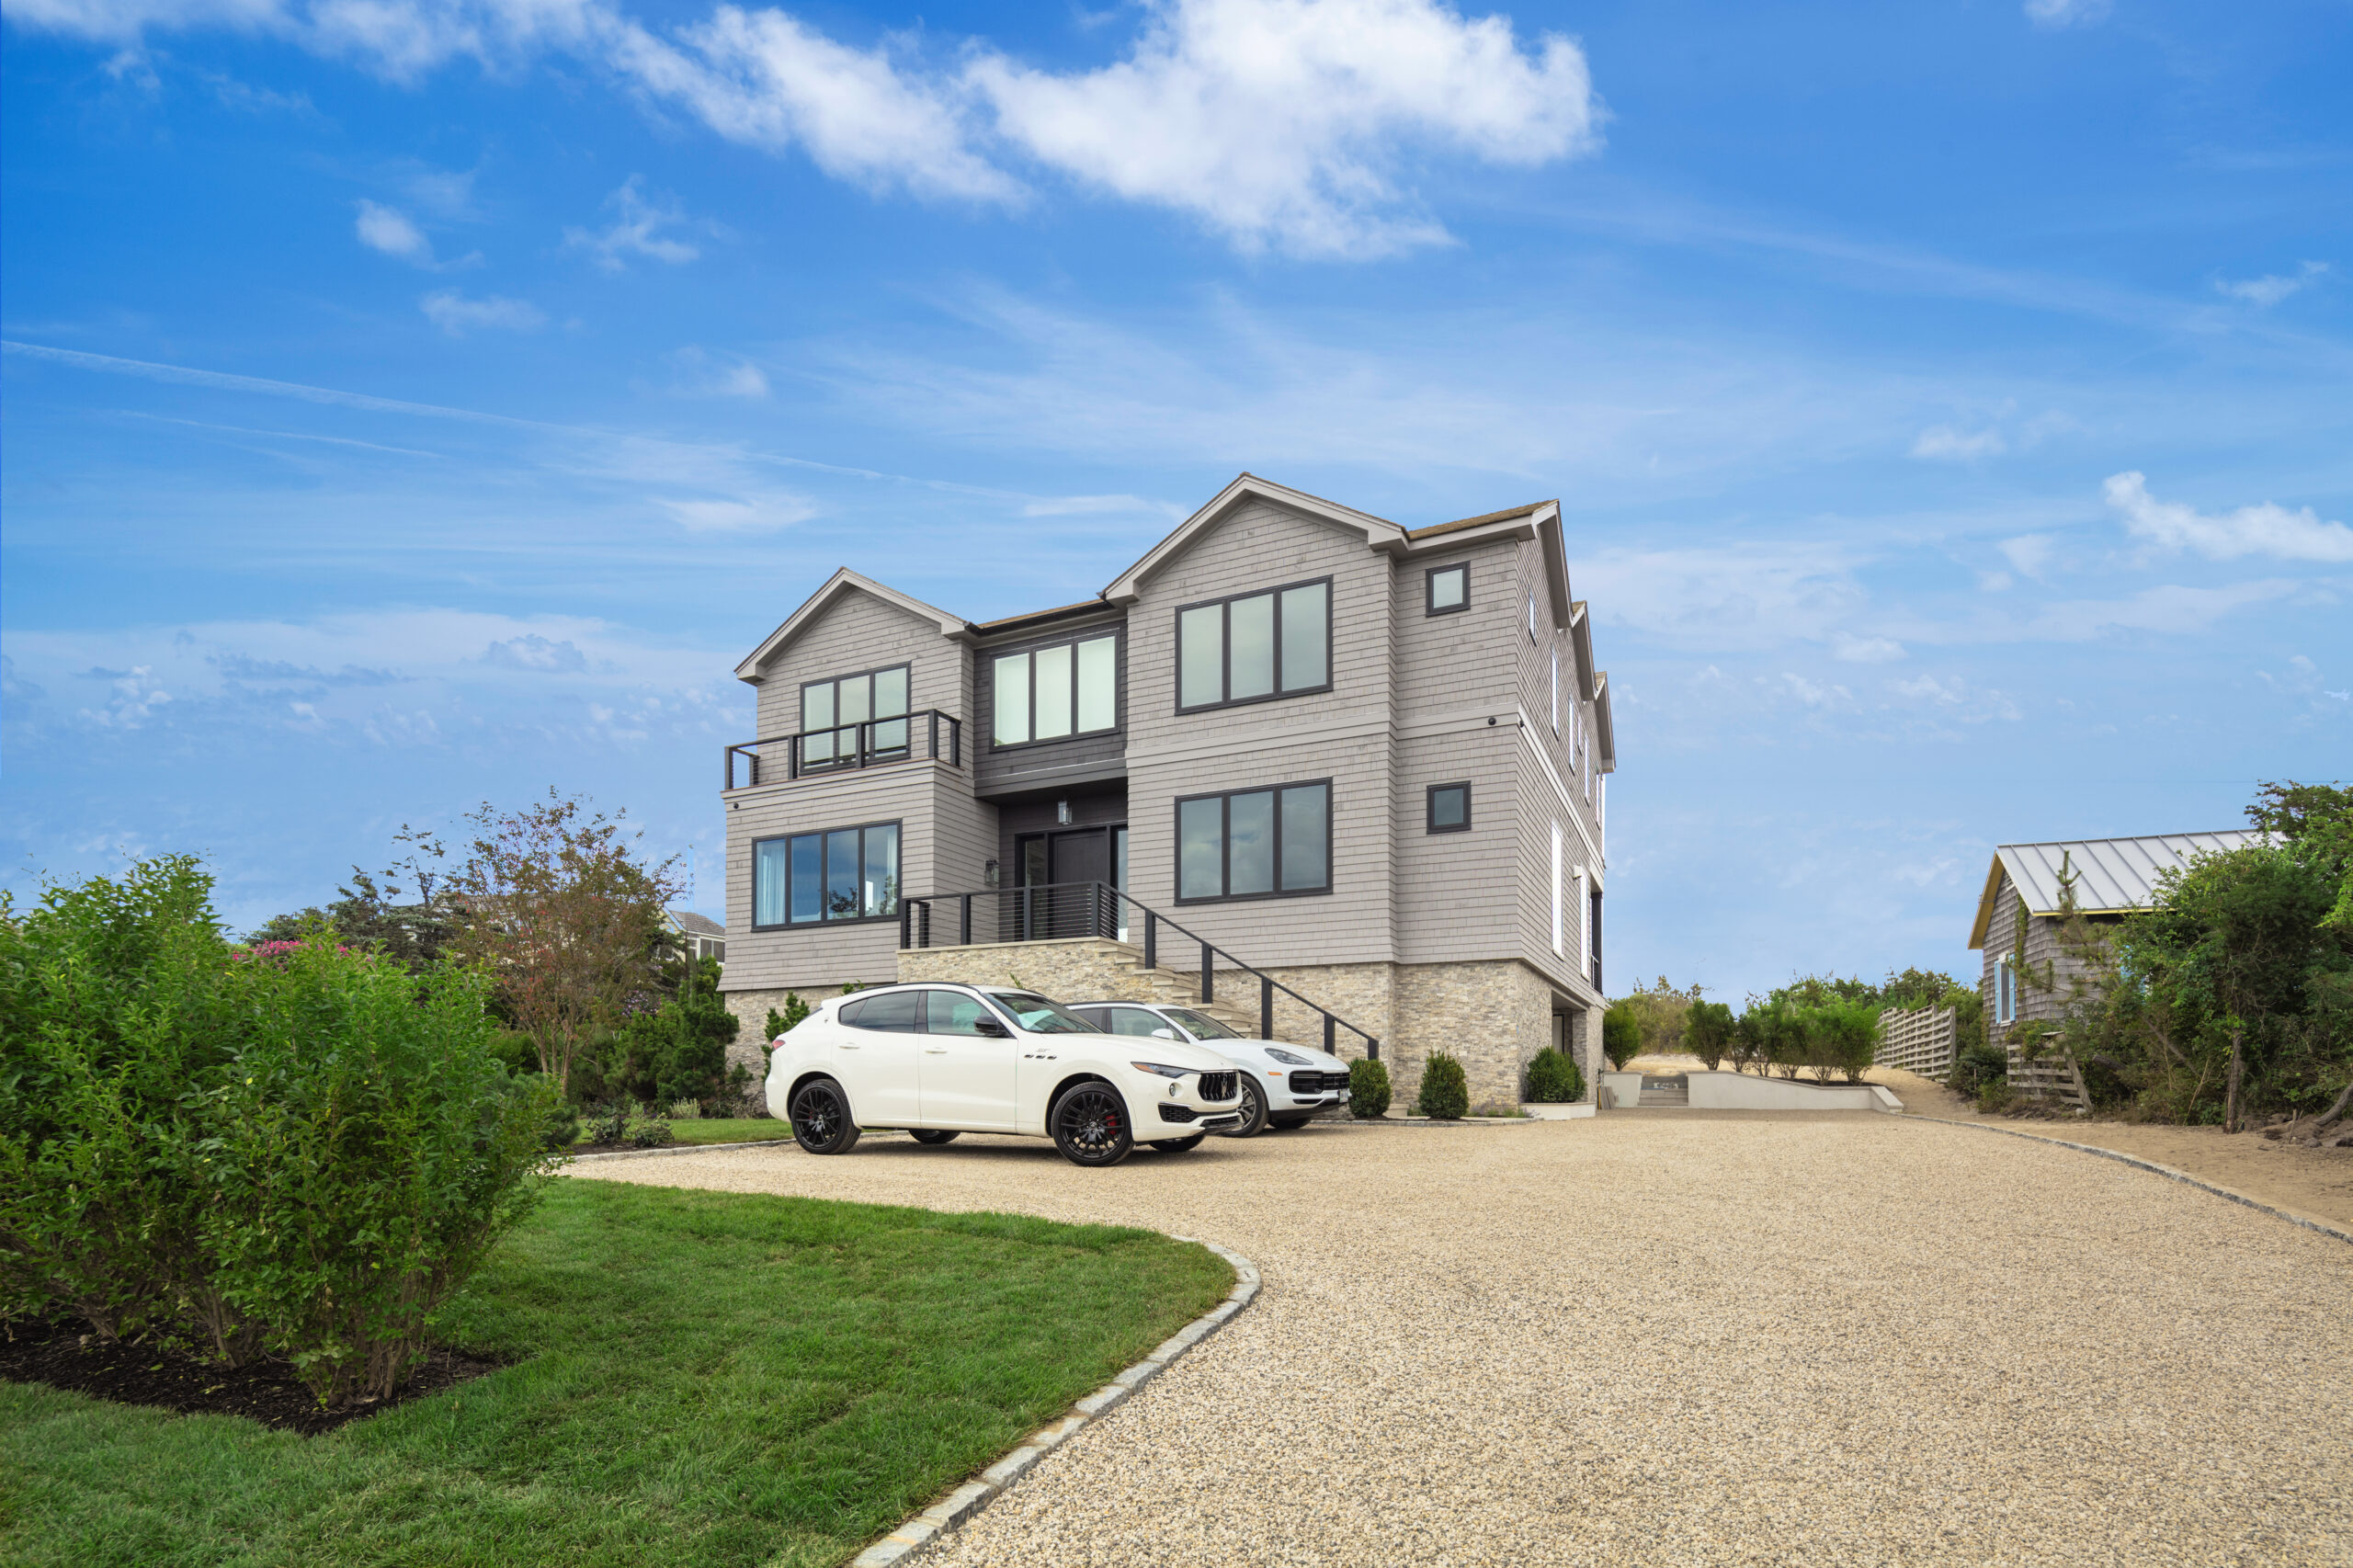 The new build by George Vickers at 98 Dune Road in Quogue sold for $11.75 million.  LPG/COURTESY DOUGLAS ELLIMAN